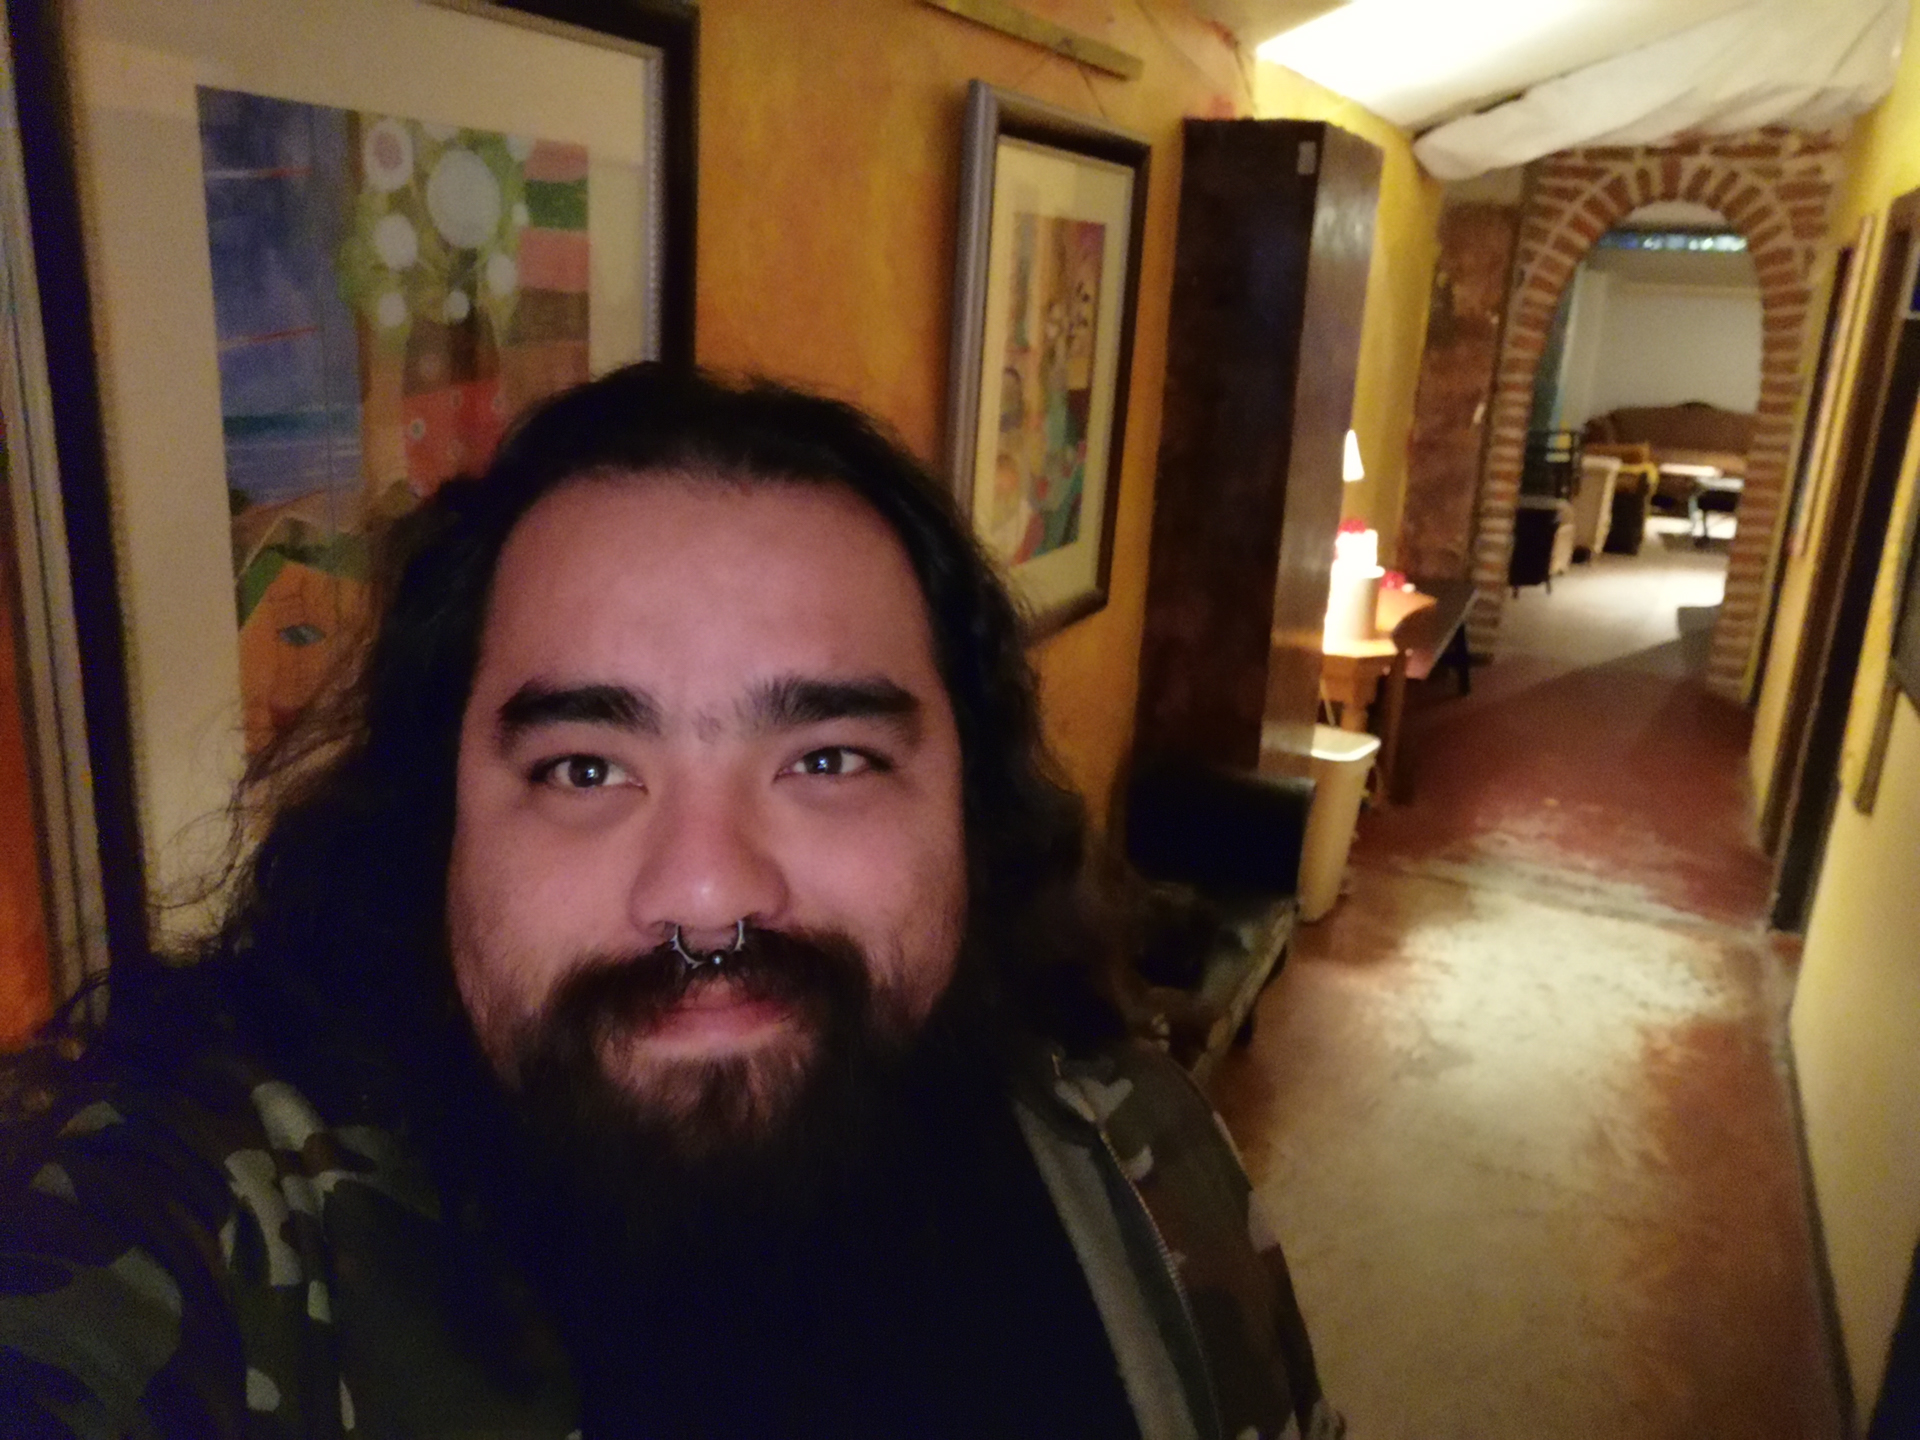 Selfie sample with HUAWEI Mate 20 Pro front camera in low light